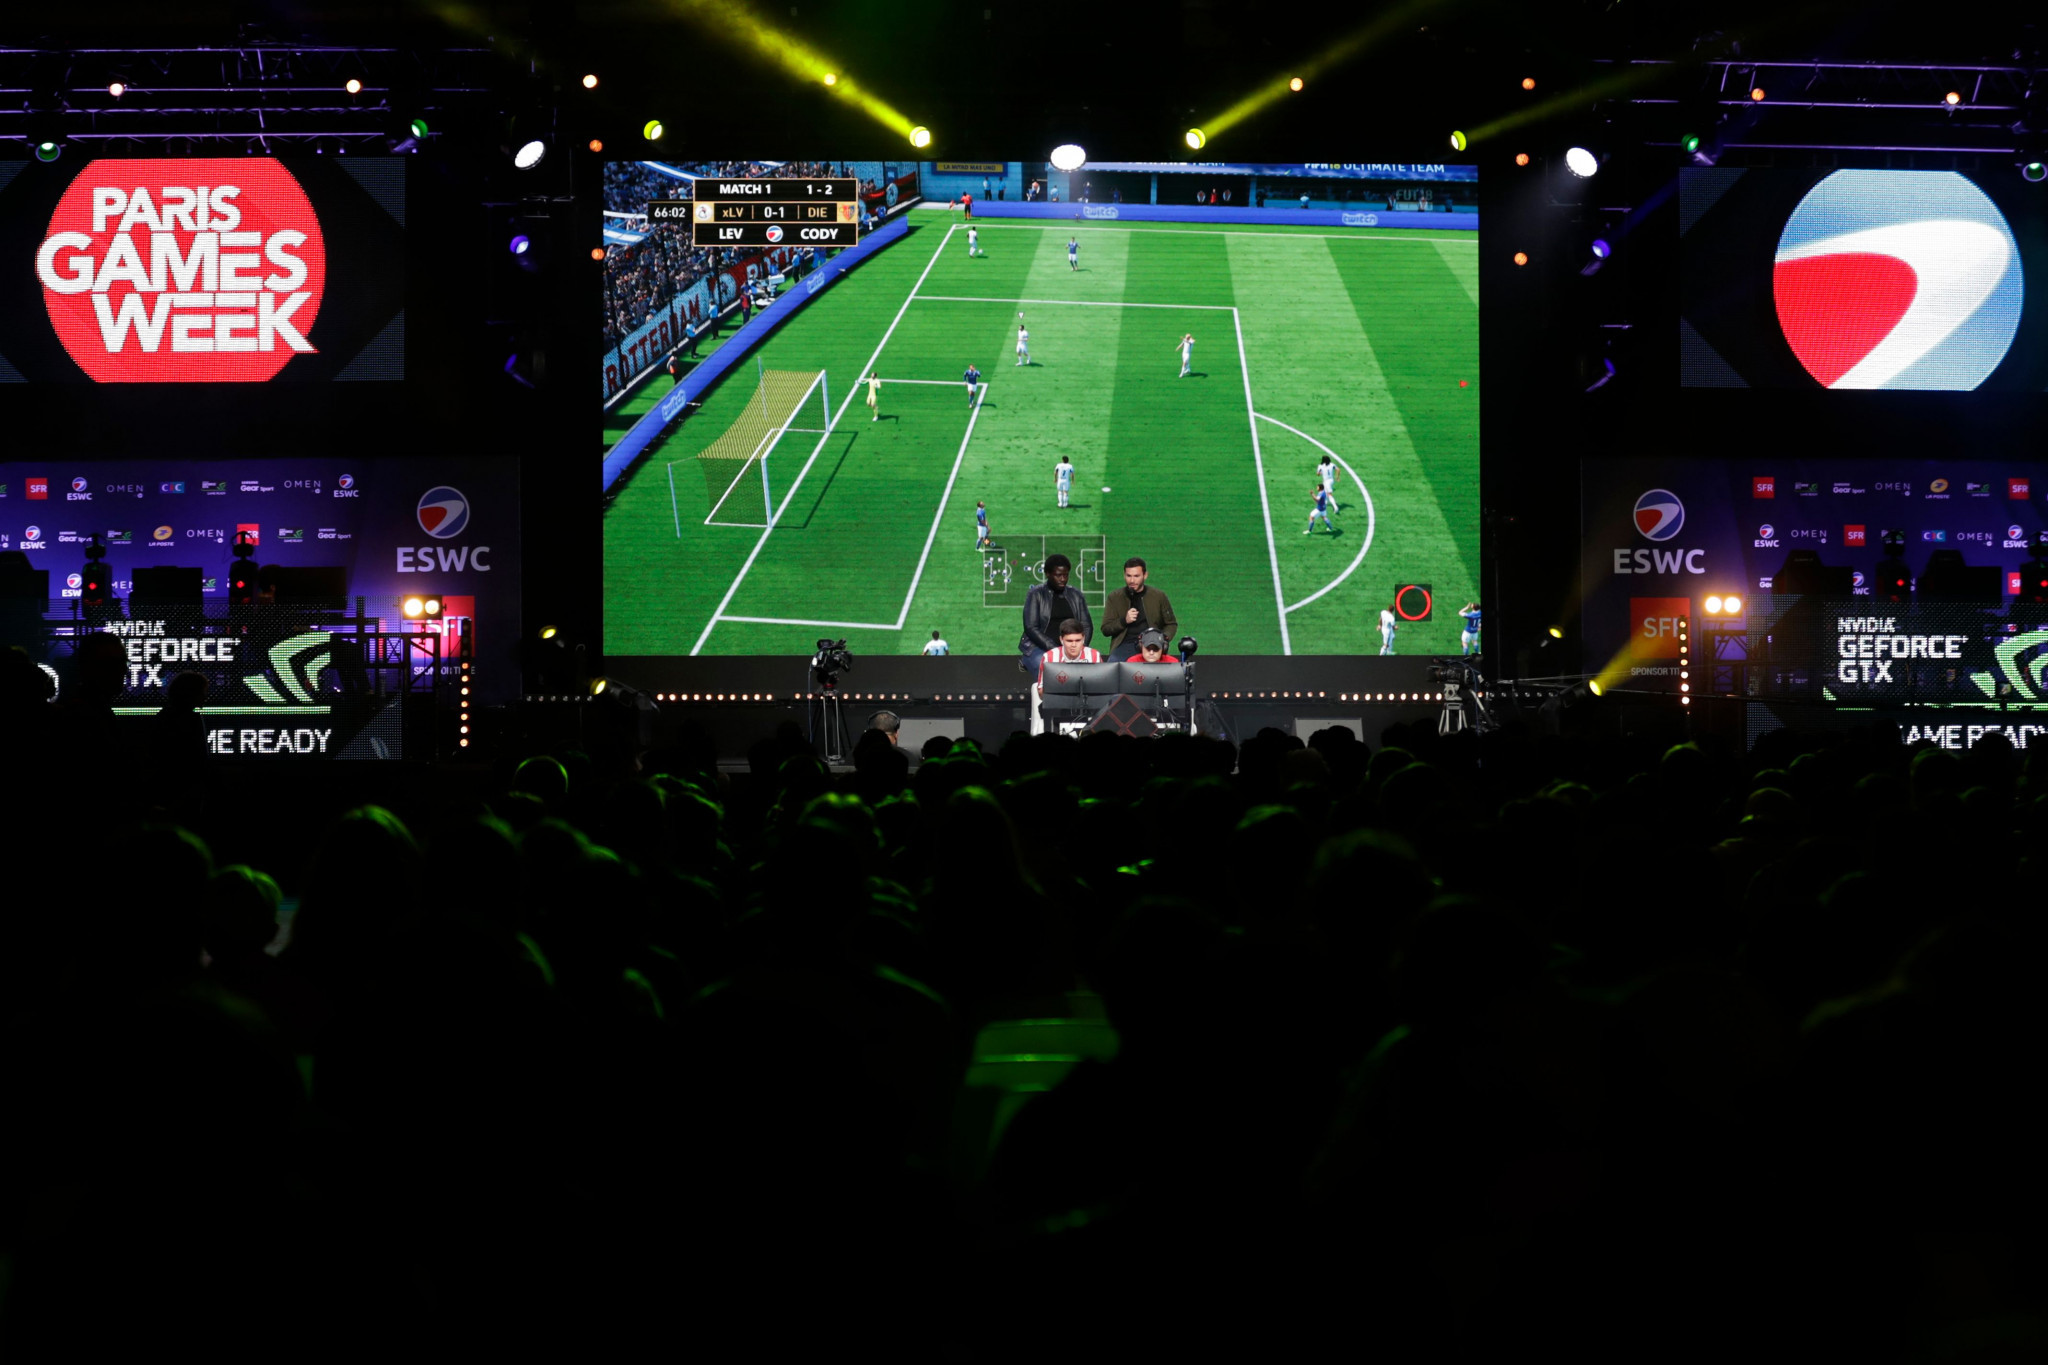 Minsk 2019 cultural programme to include esports with FIFA 19 tournament proposed